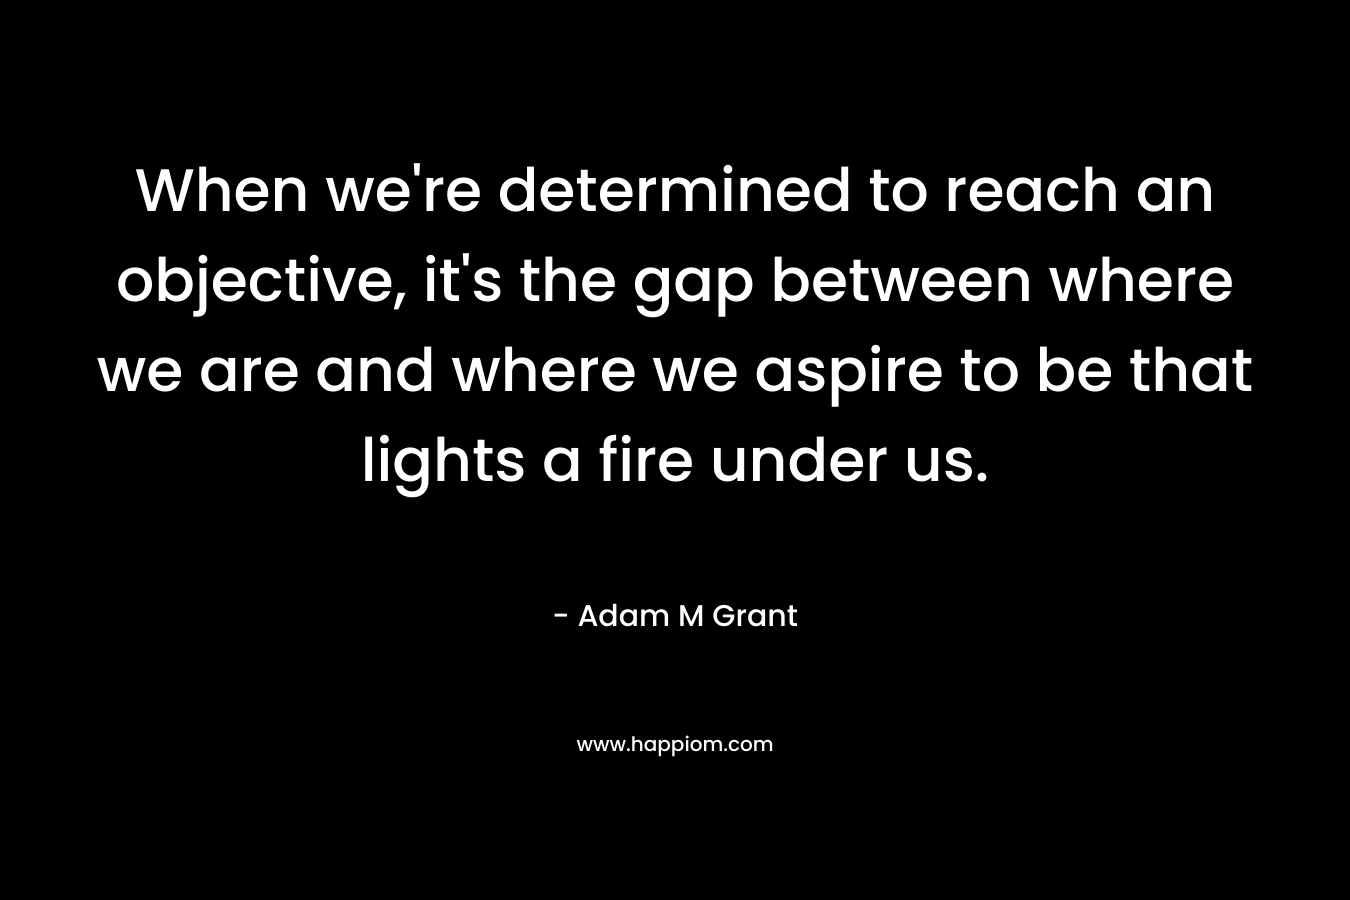 When we're determined to reach an objective, it's the gap between where we are and where we aspire to be that lights a fire under us.